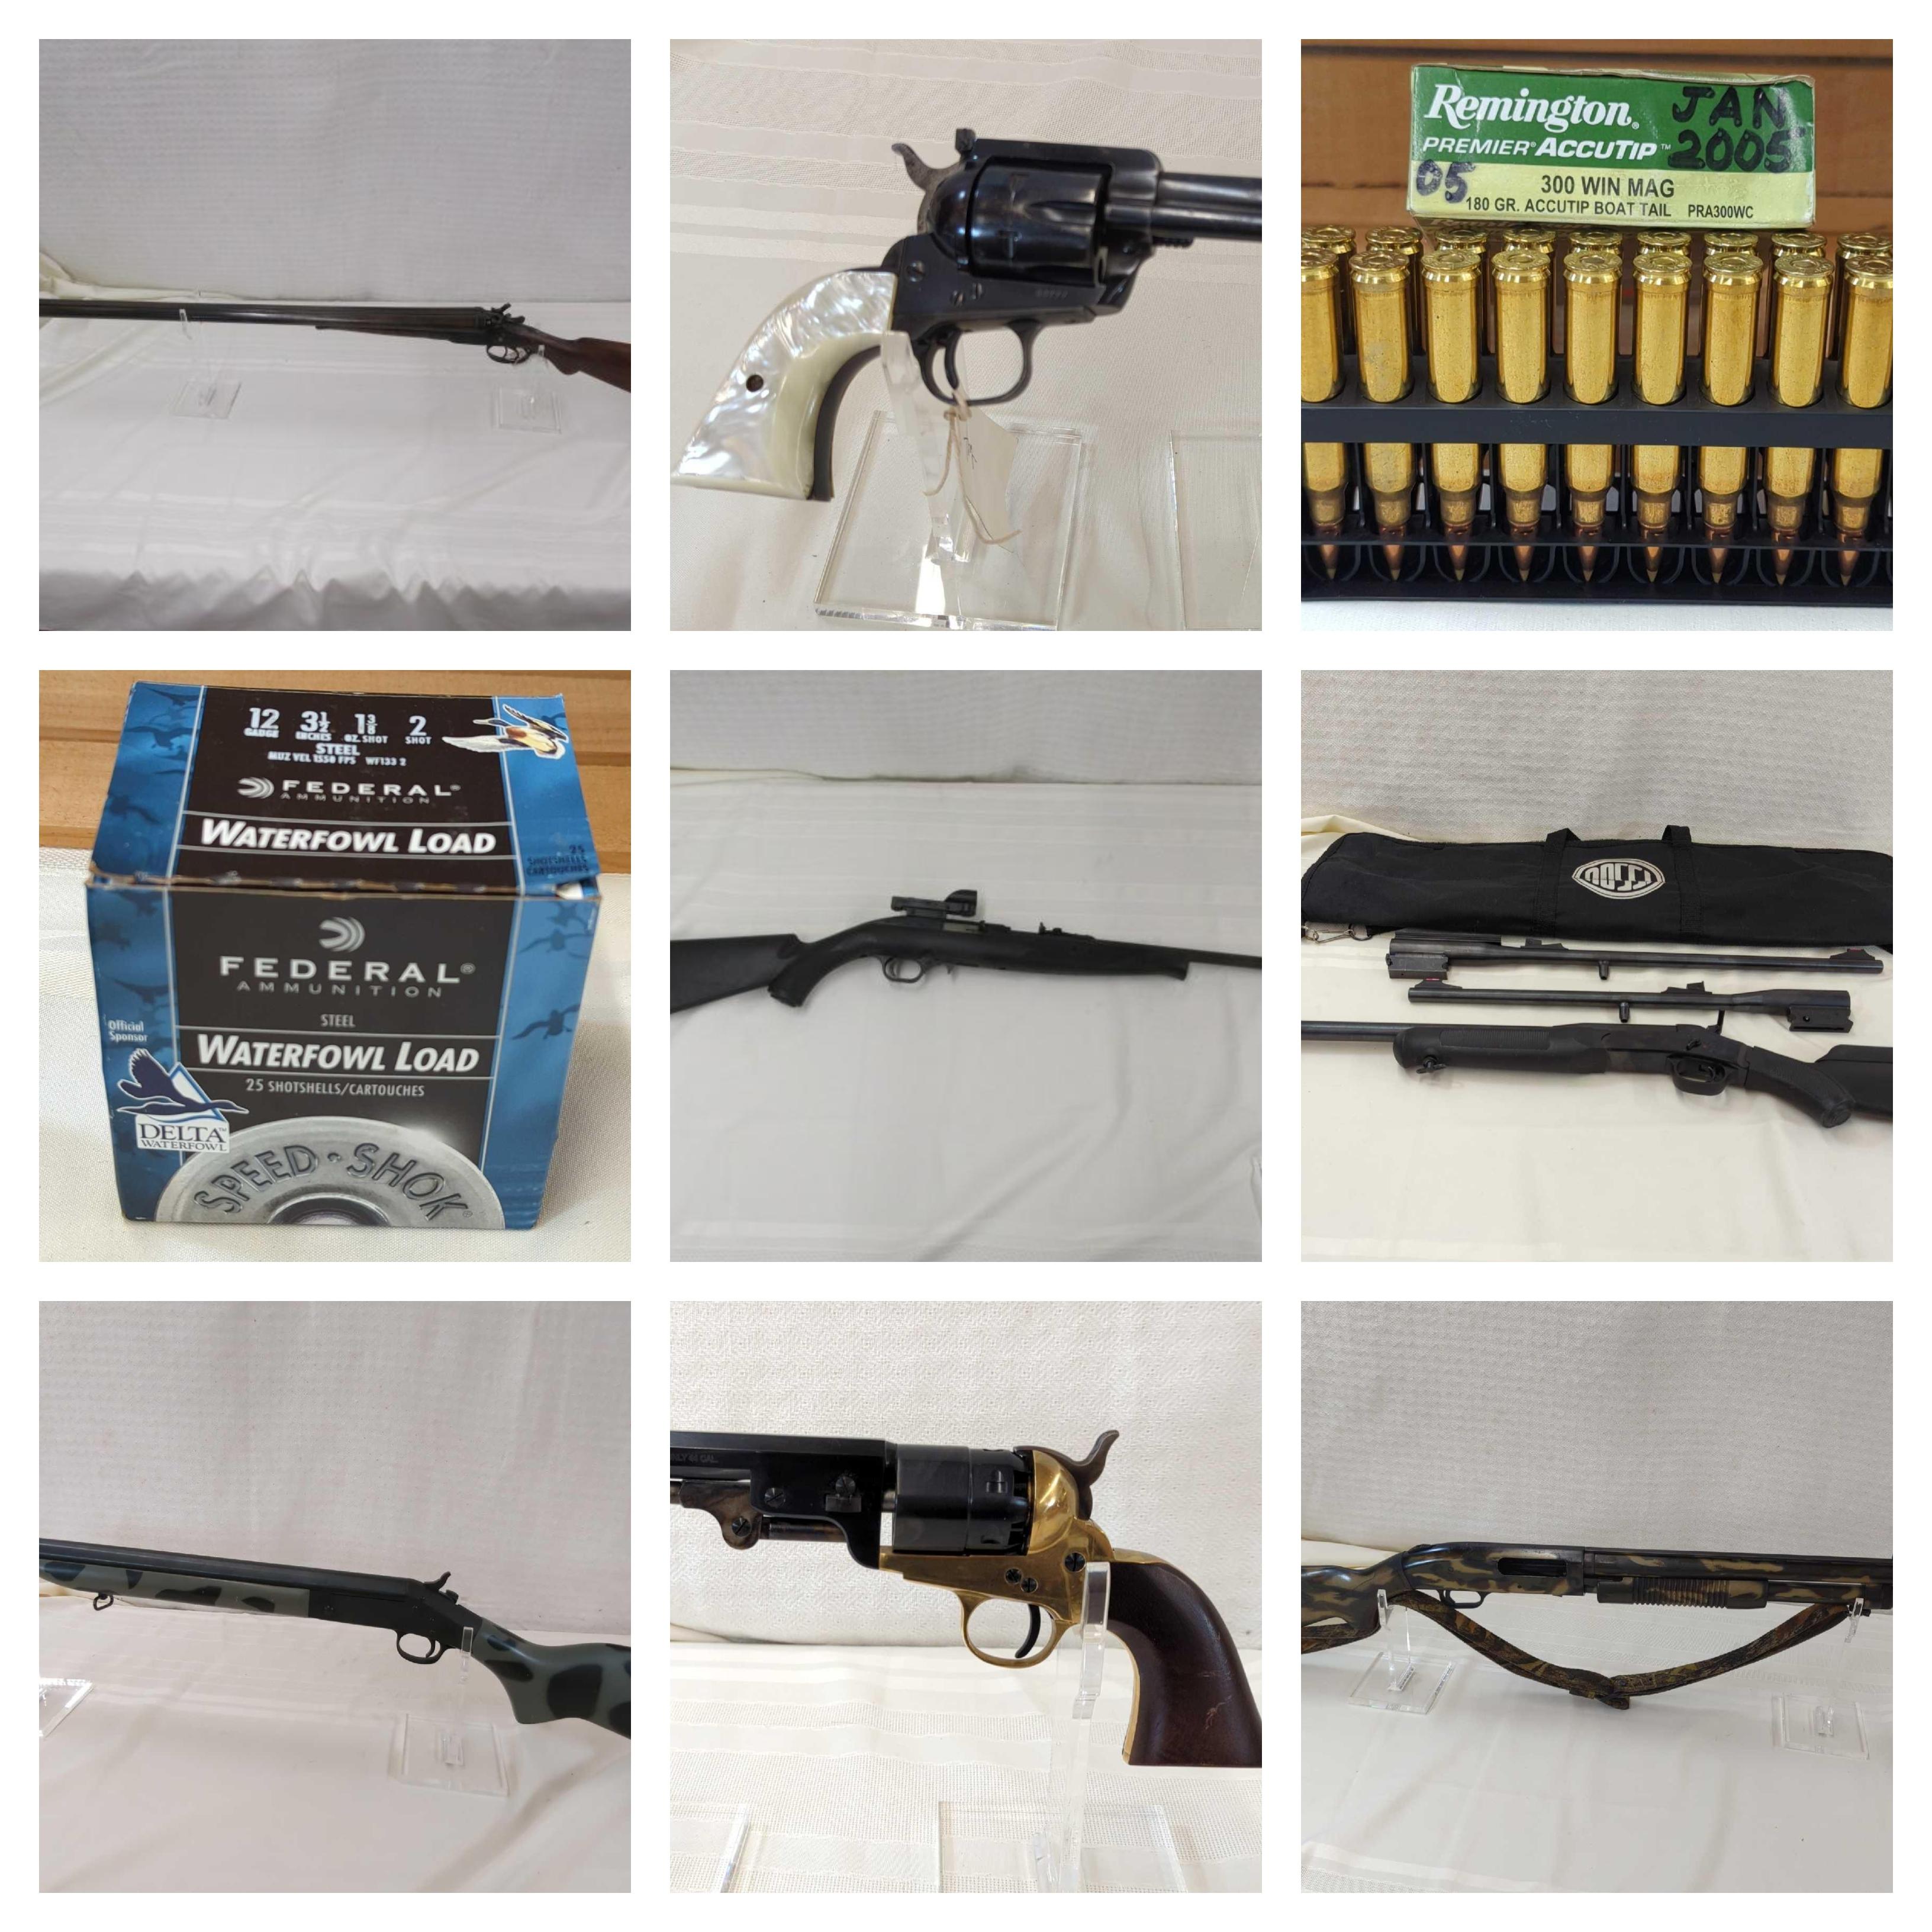 SUMMERTIME FIREARMS & AMMO ONLINE AUCTION